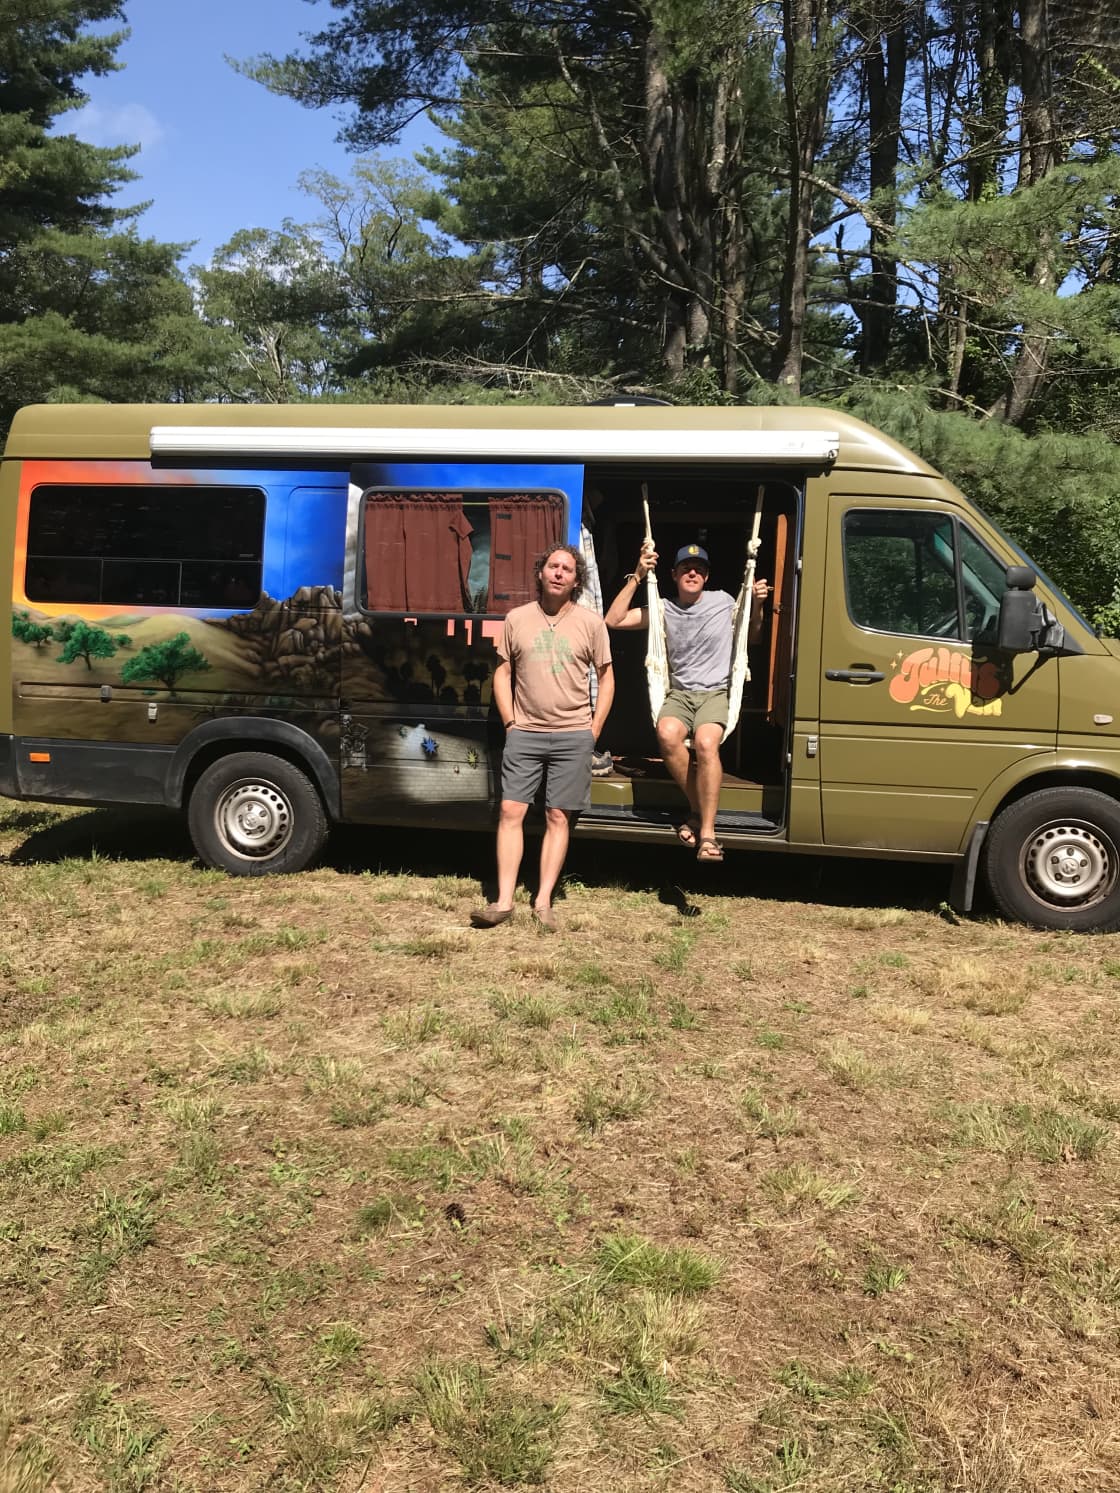 Matt, Ted and Julius the camper!  Amazing experience with these folks! They named this area of the property "Council of the Elders."  So fitting. 